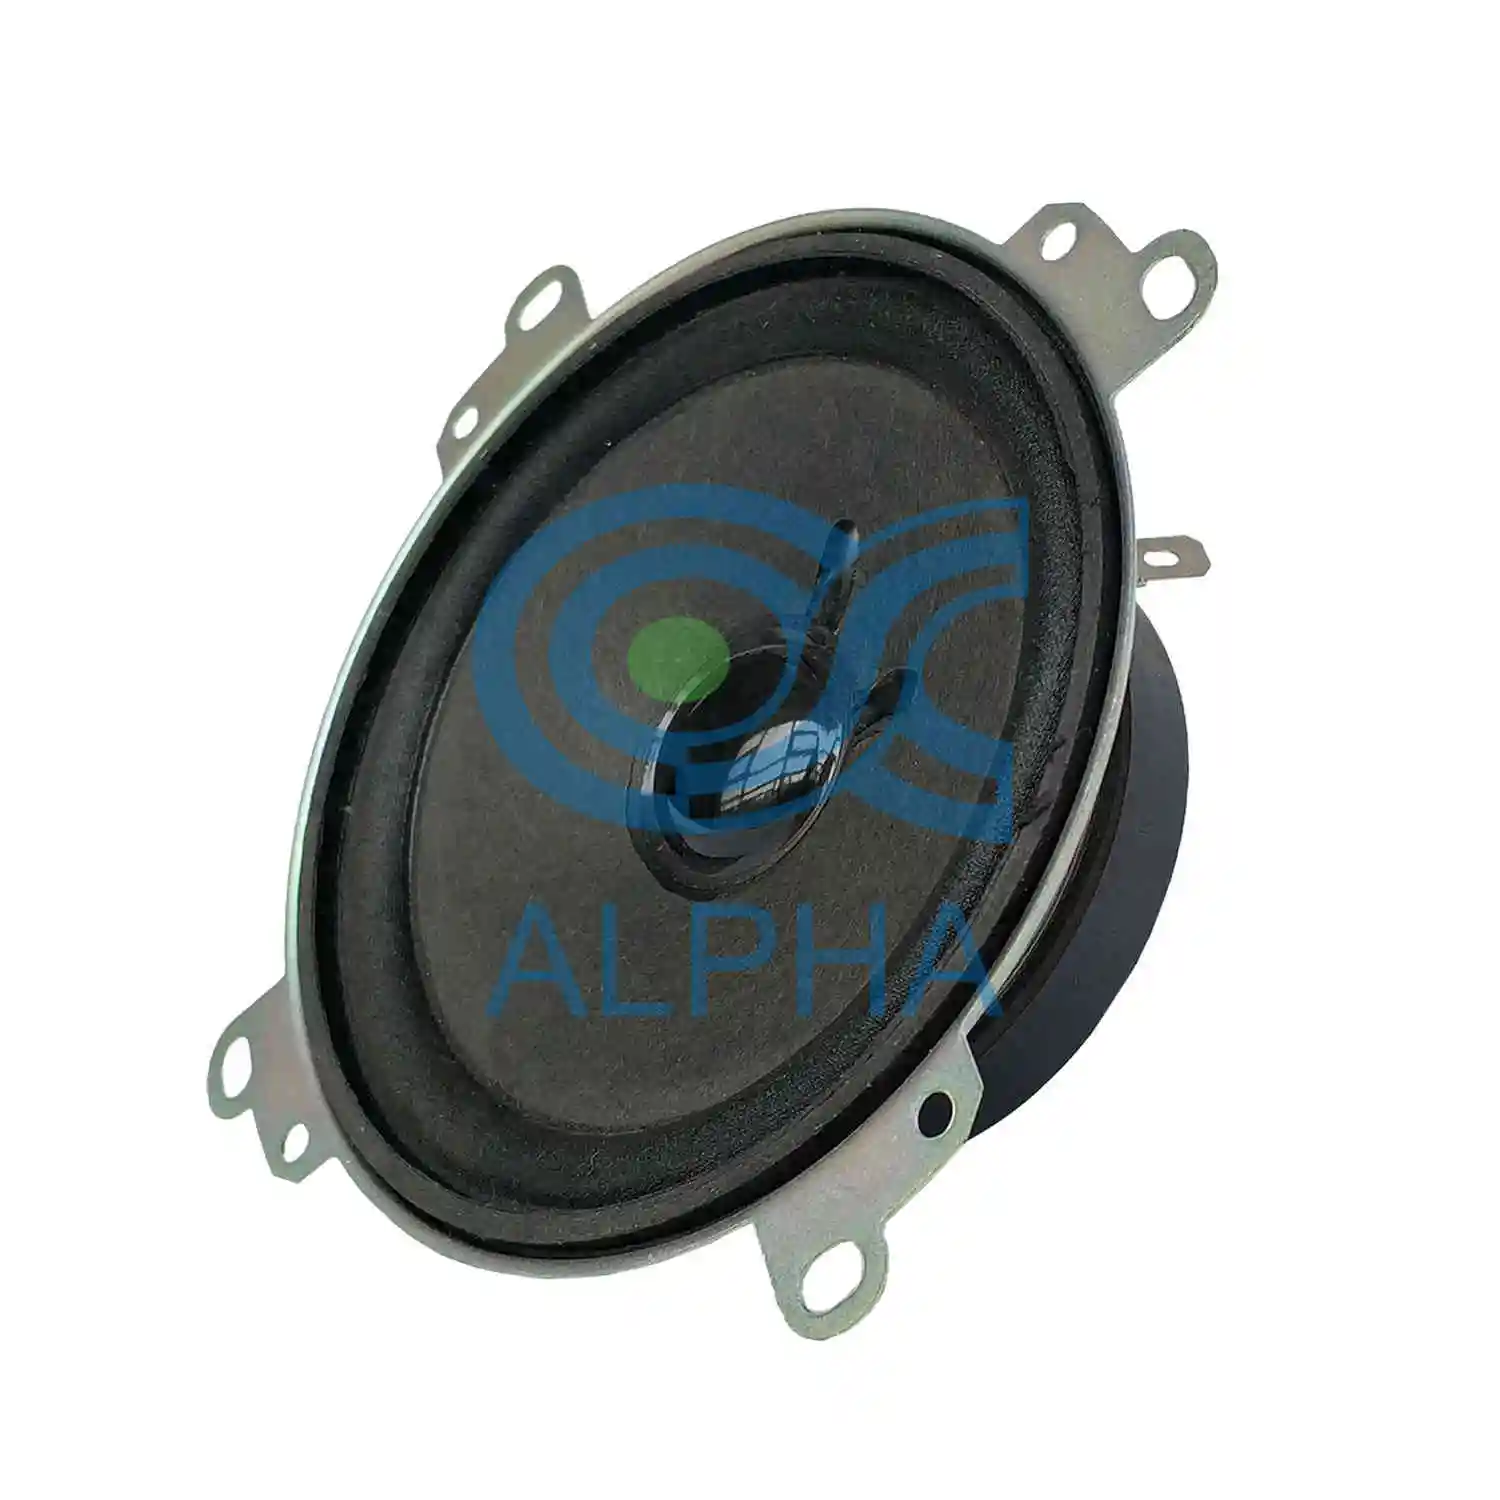 4 inch audio speaker unit rubber edge paper cone alarm buzzer tweeter horn powered pa woofer for home theater amplifier system